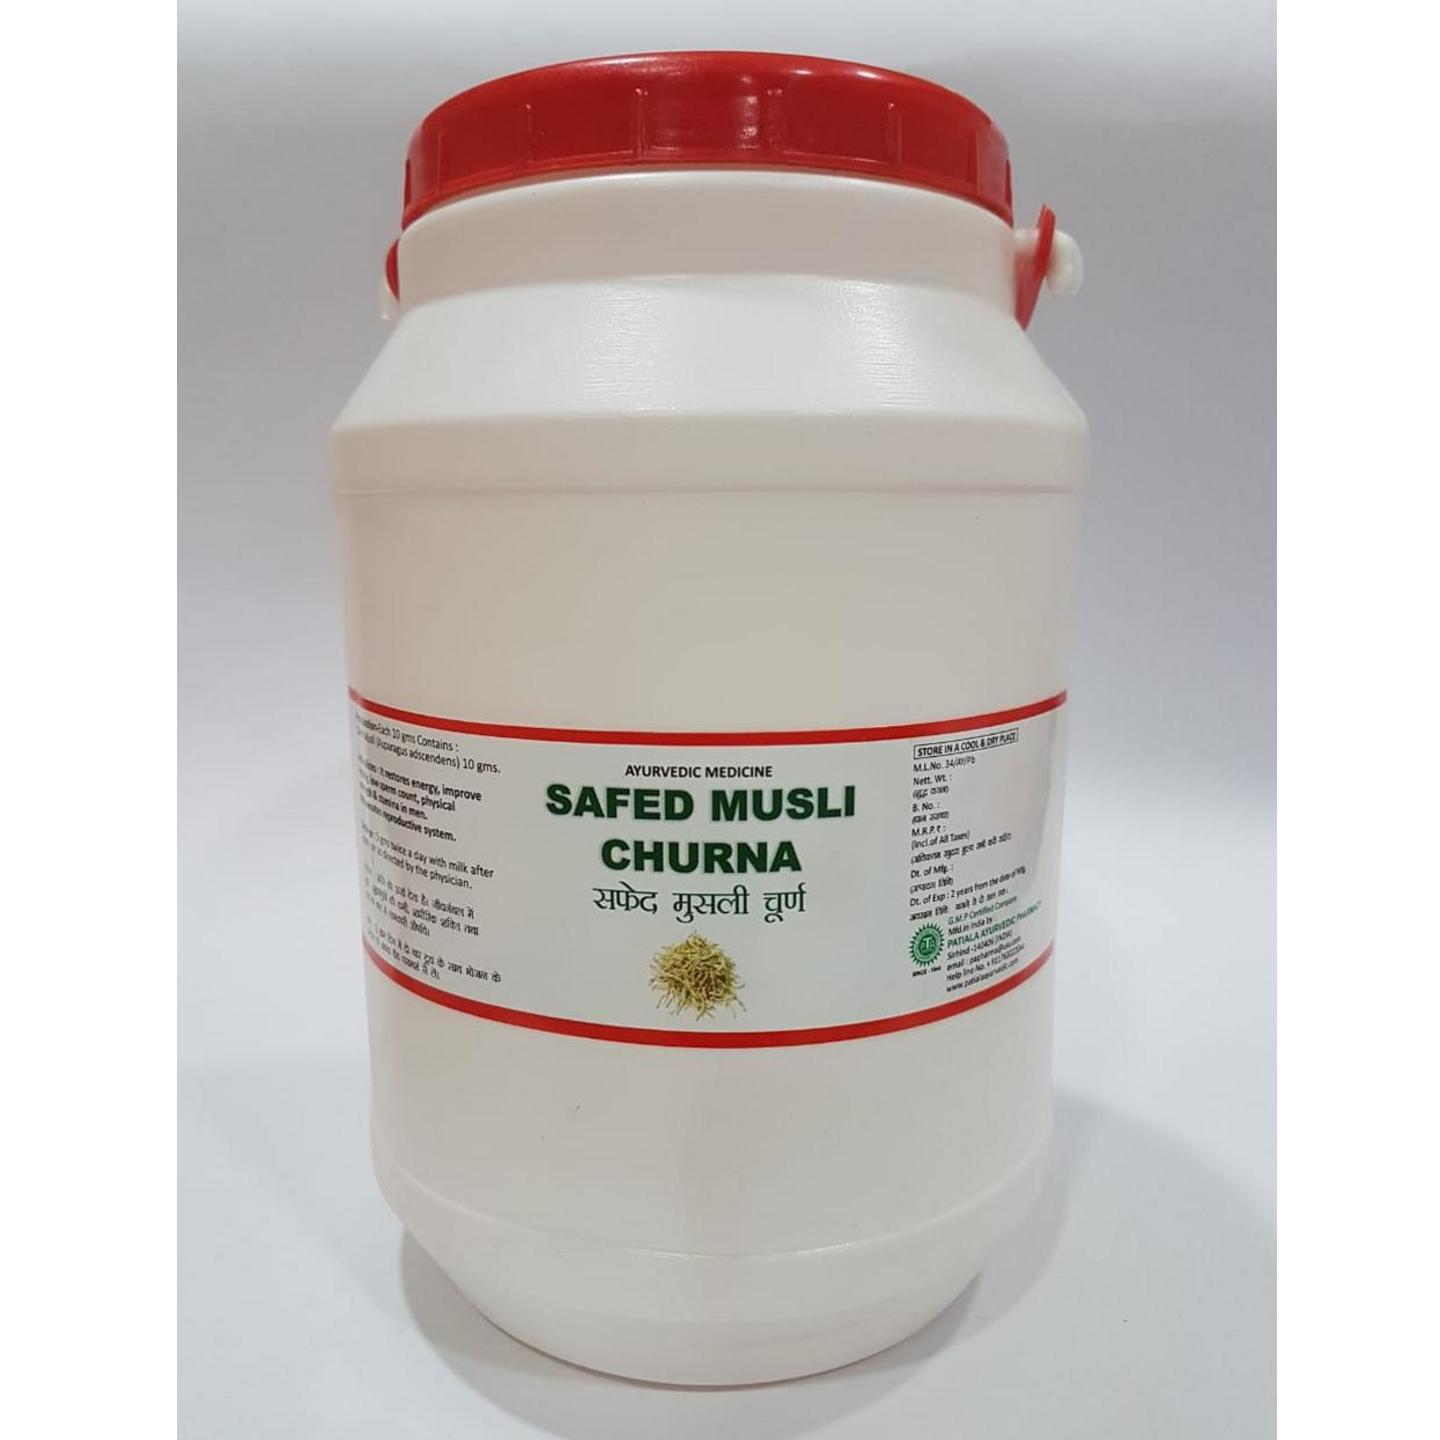 safed musli churna 1 Kg X 1 for physical strength and stamina in men